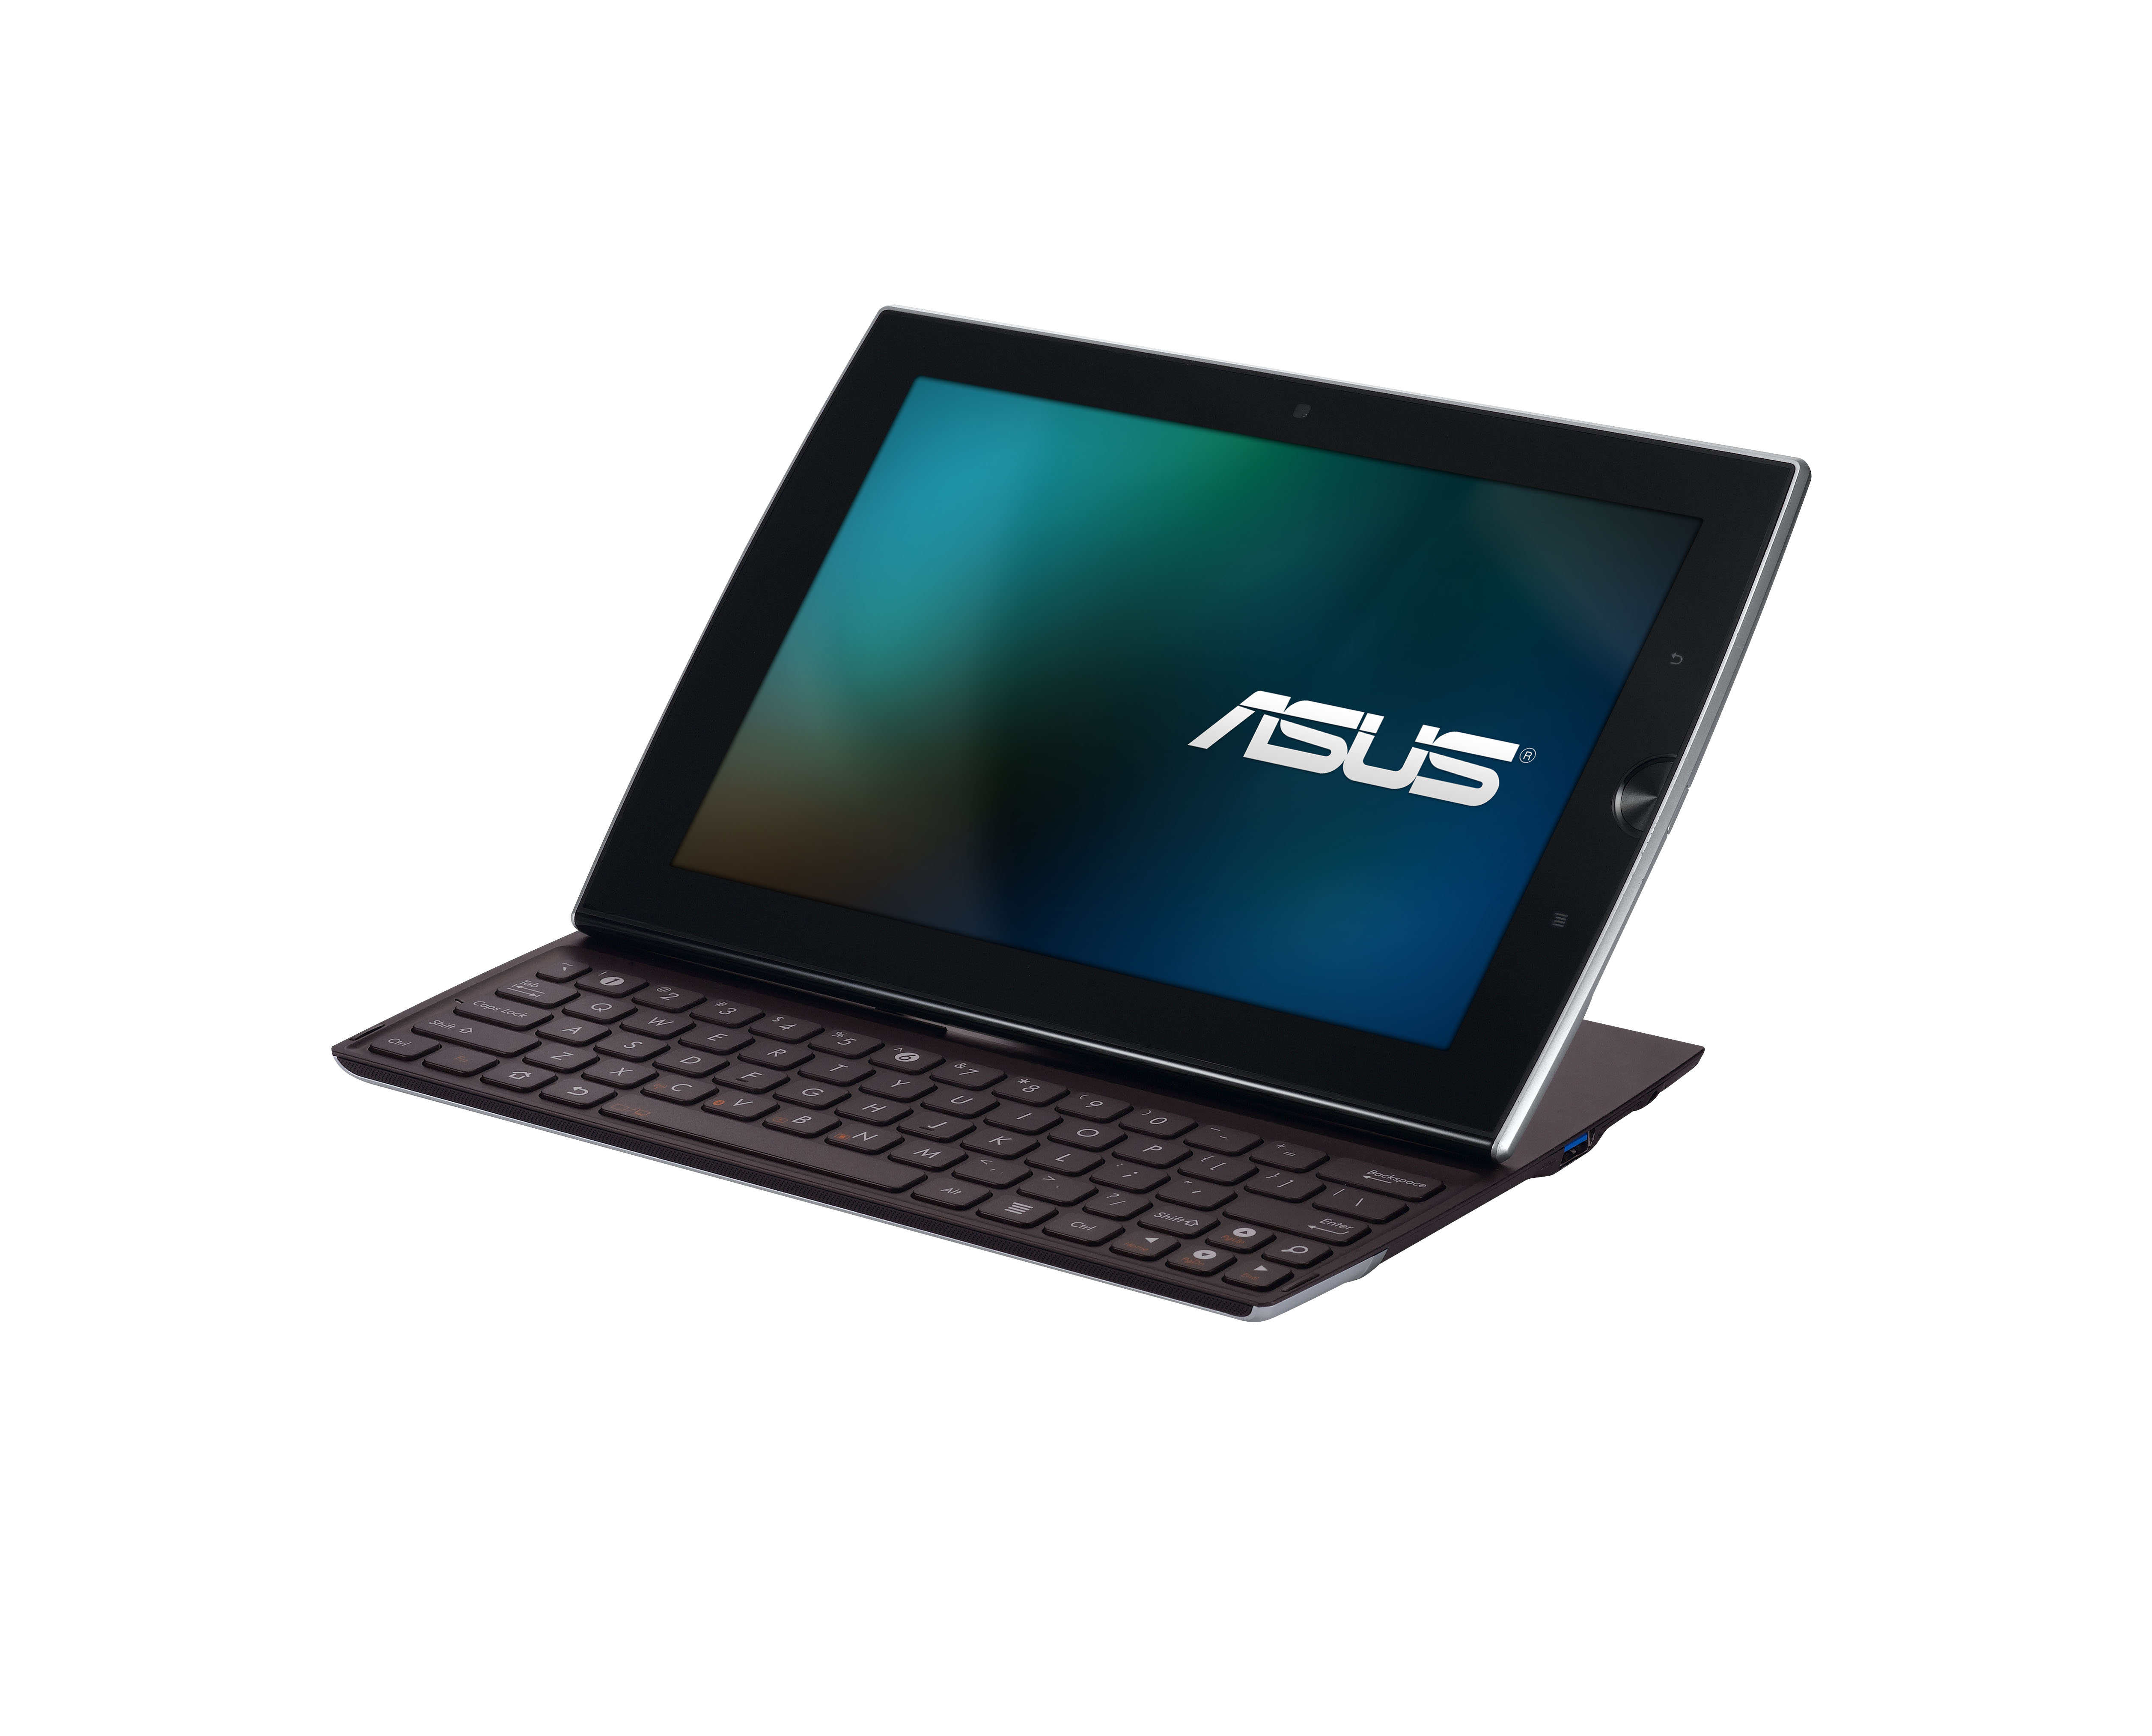 Asus Launches The Eeepad Slider Tablet With Slide Out Keyboard